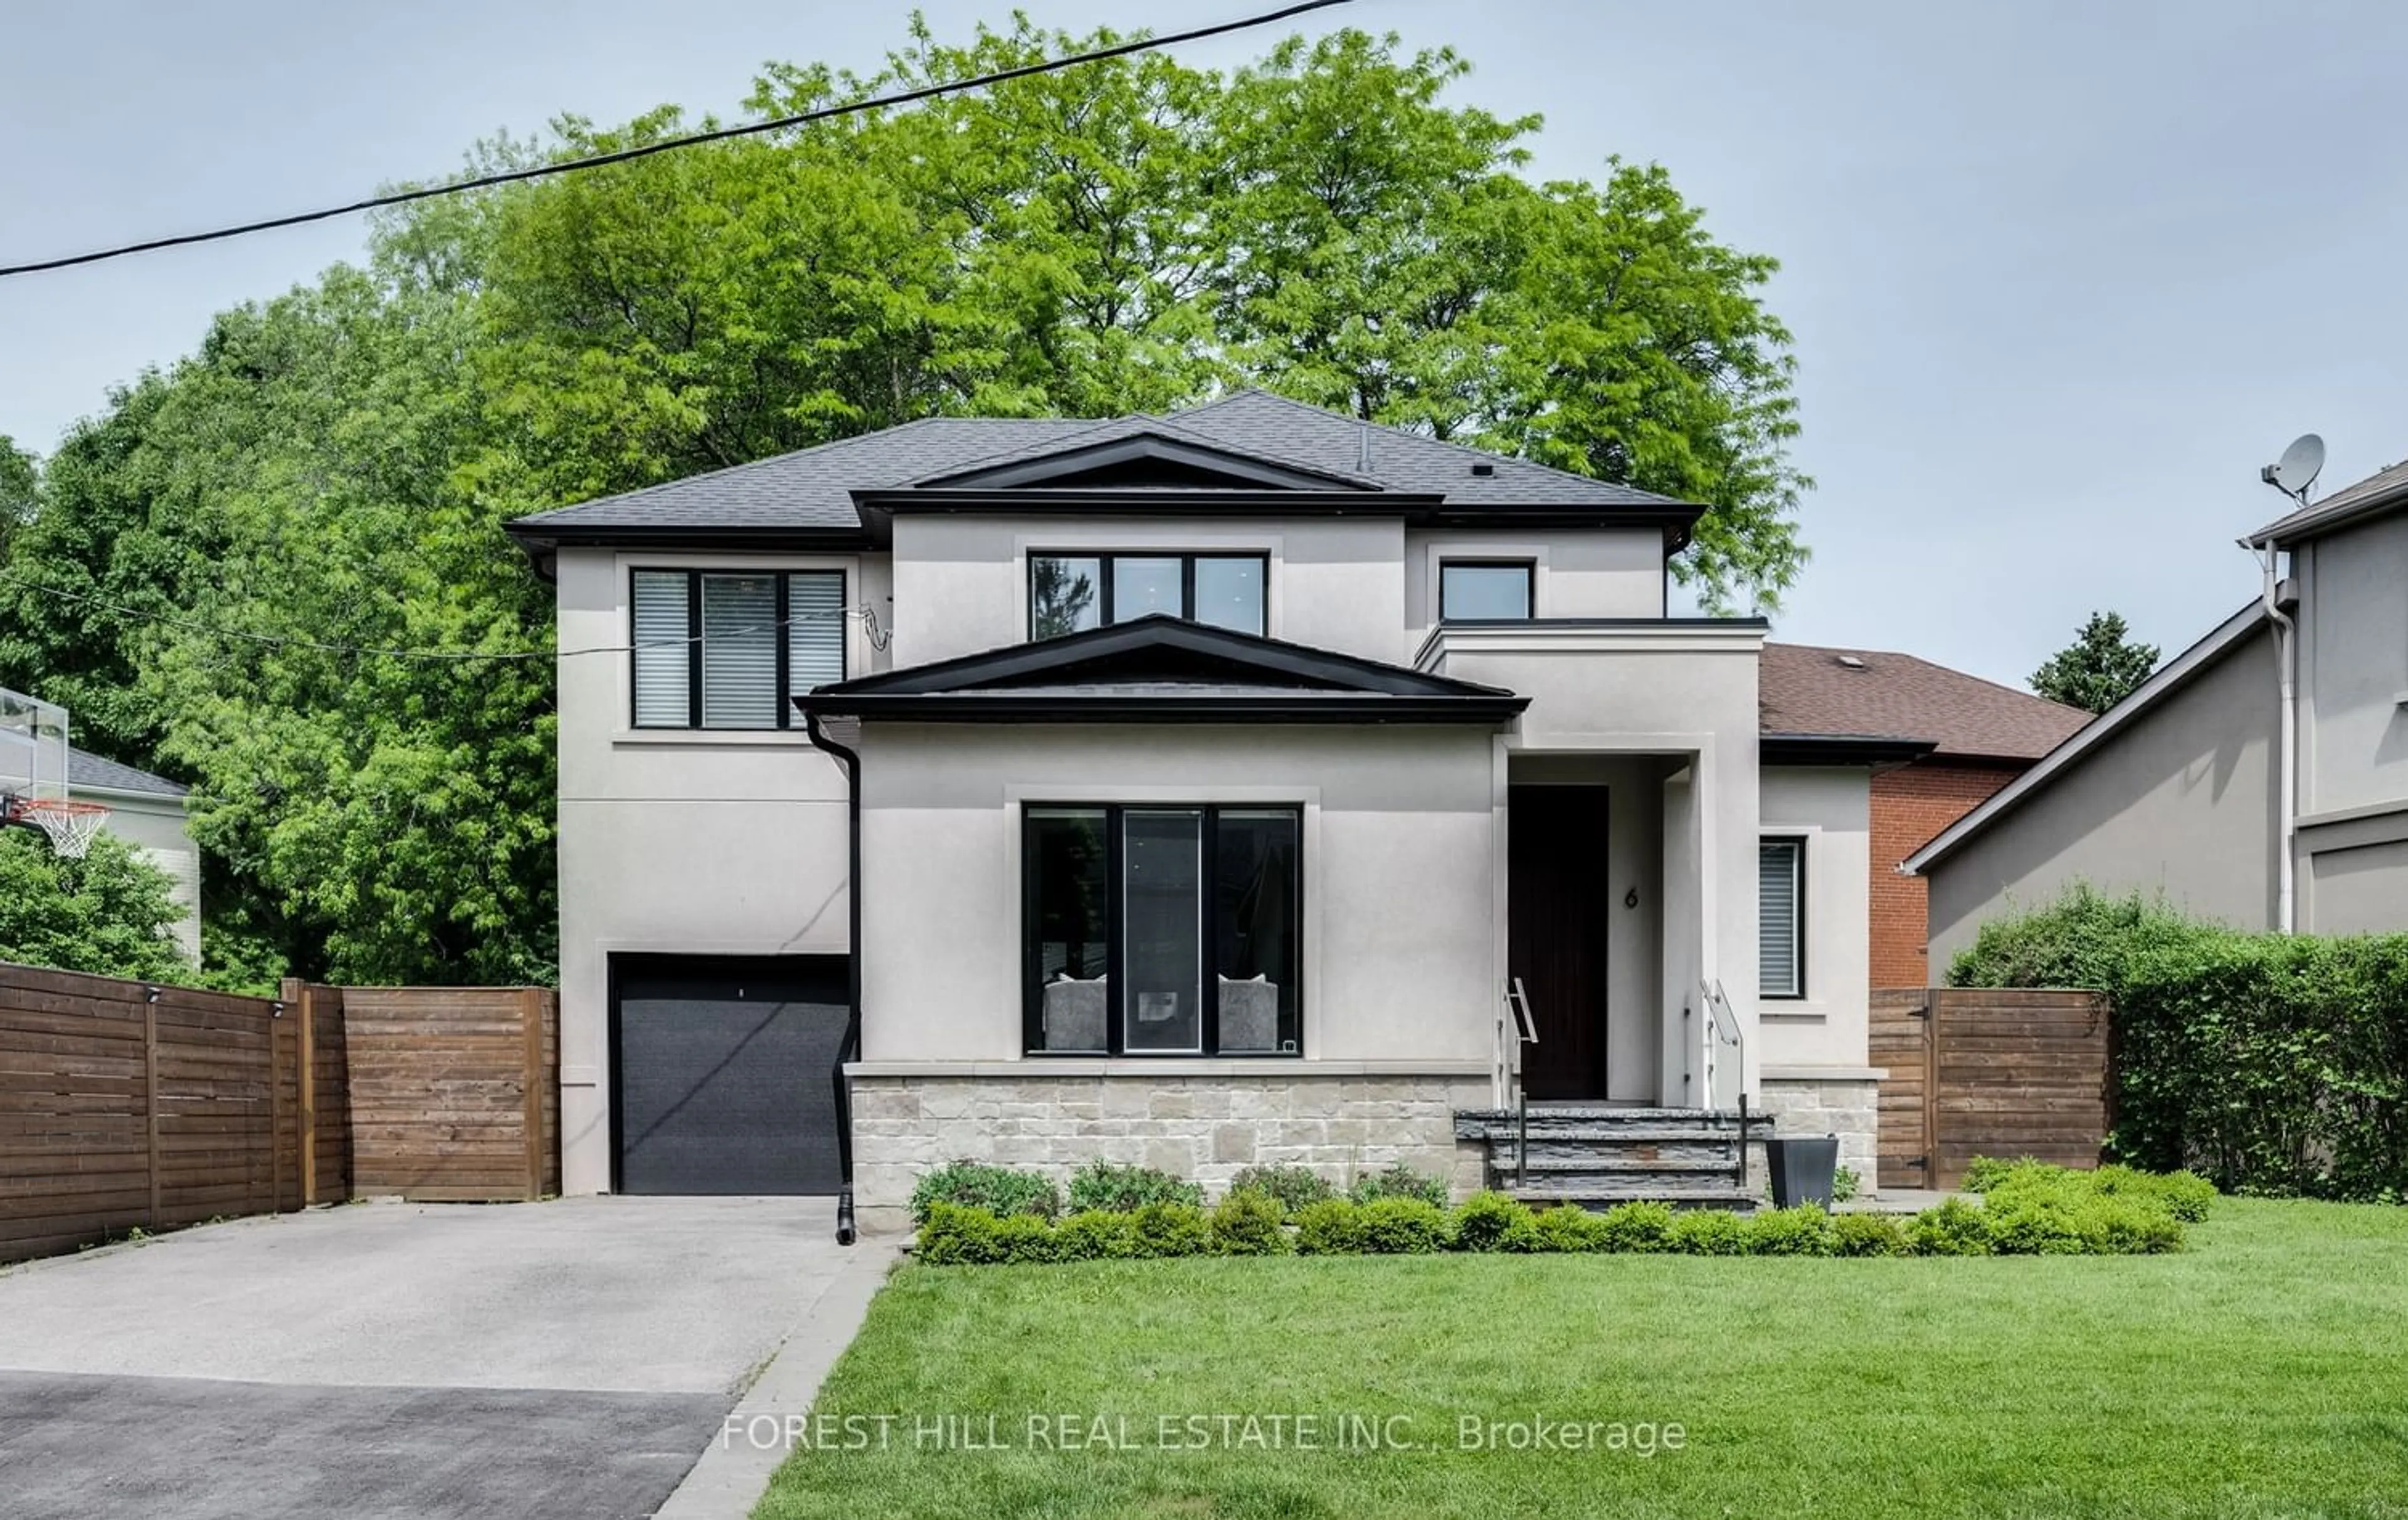 Home with brick exterior material for 6 Romney Rd, Toronto Ontario M3H 1H2